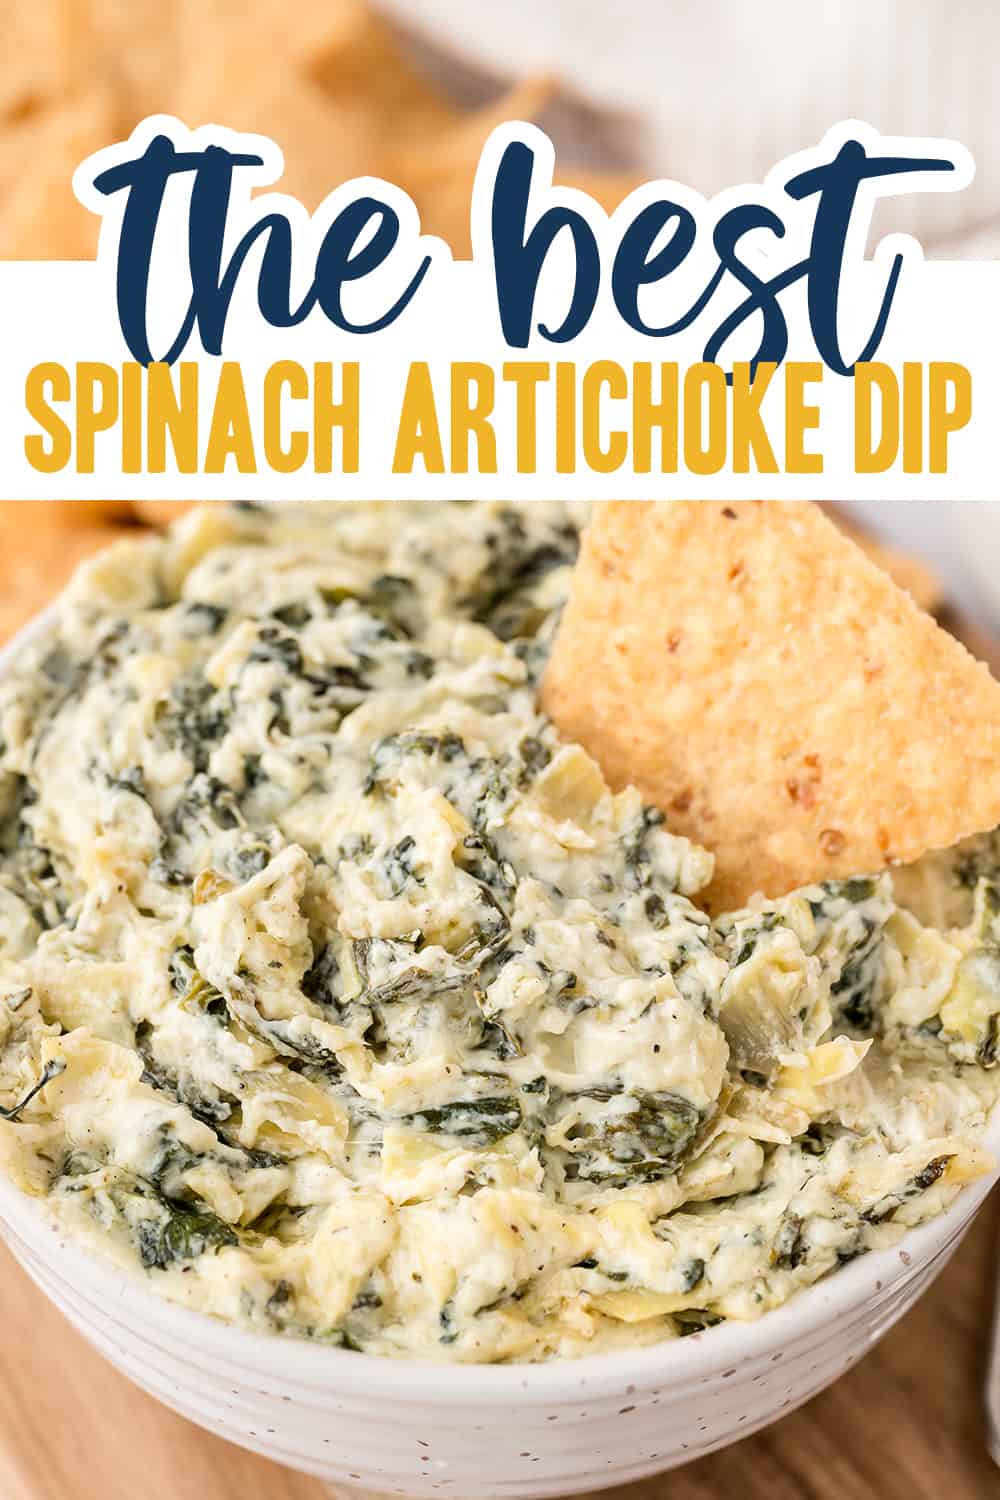 Spinach artichoke dip in white bowl with tortilla chips.